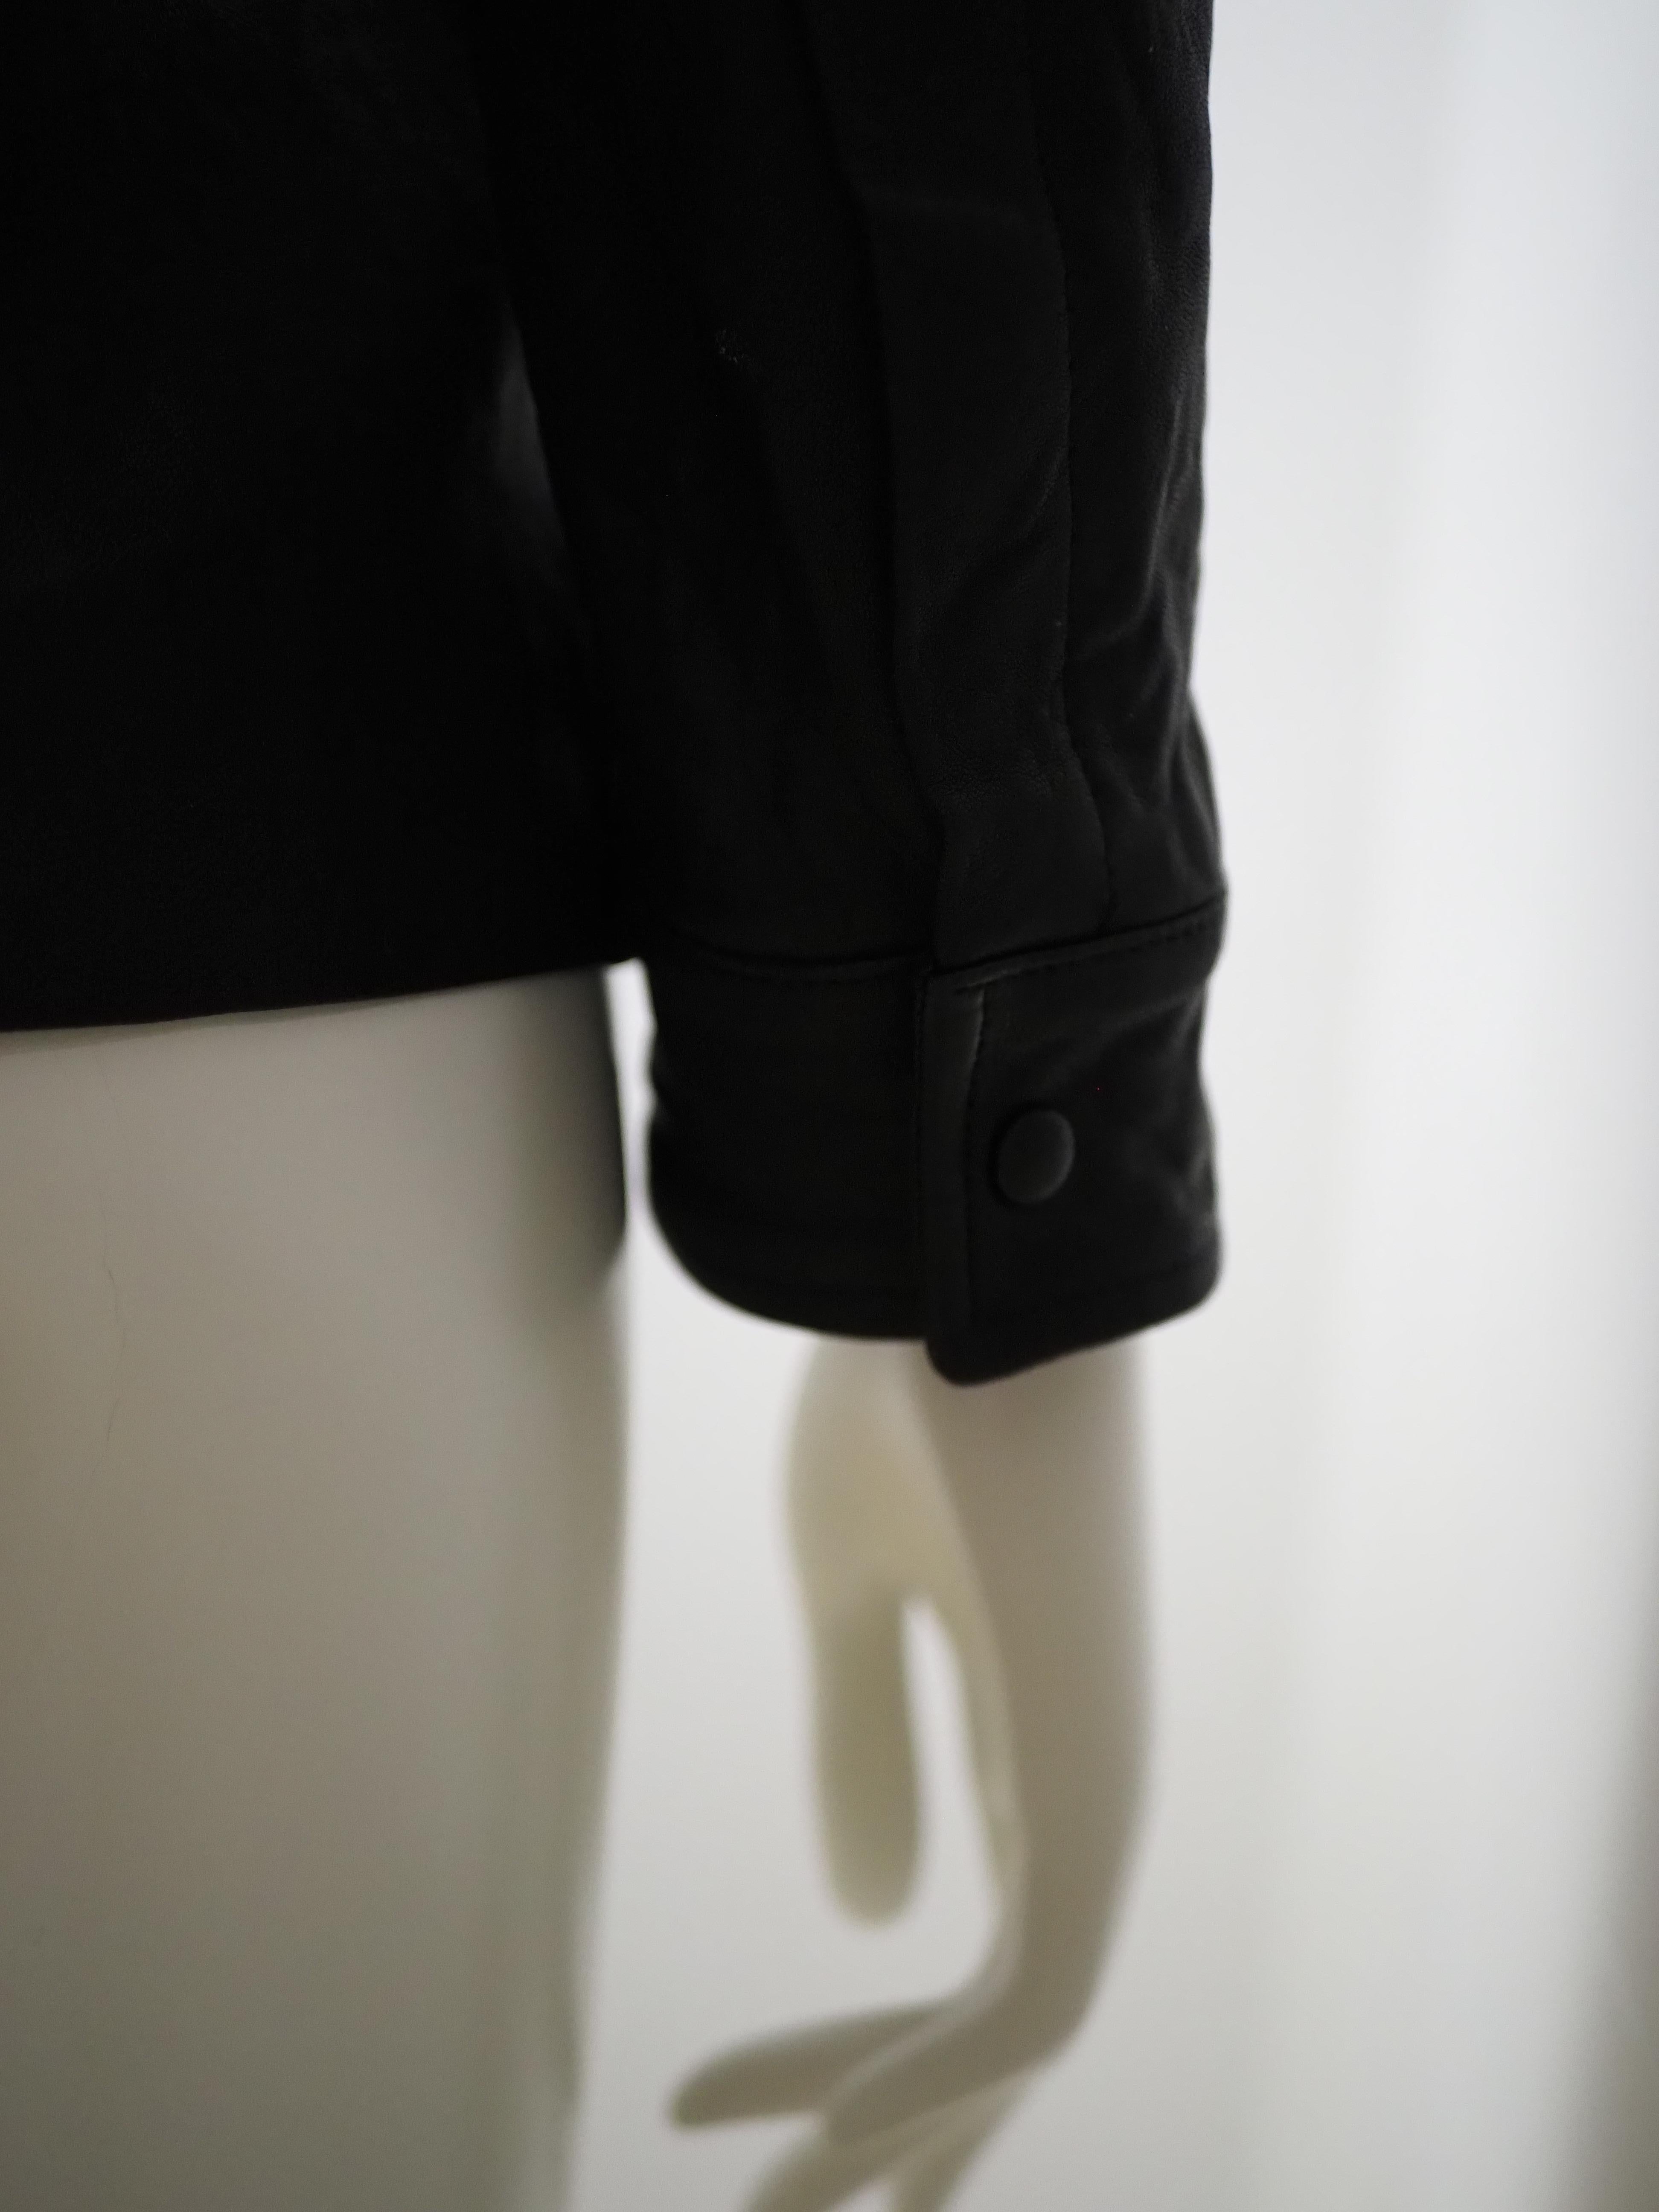 Chanel black lamb skin jacket
lining polyamide
totally made in france in size FR 34, IT38